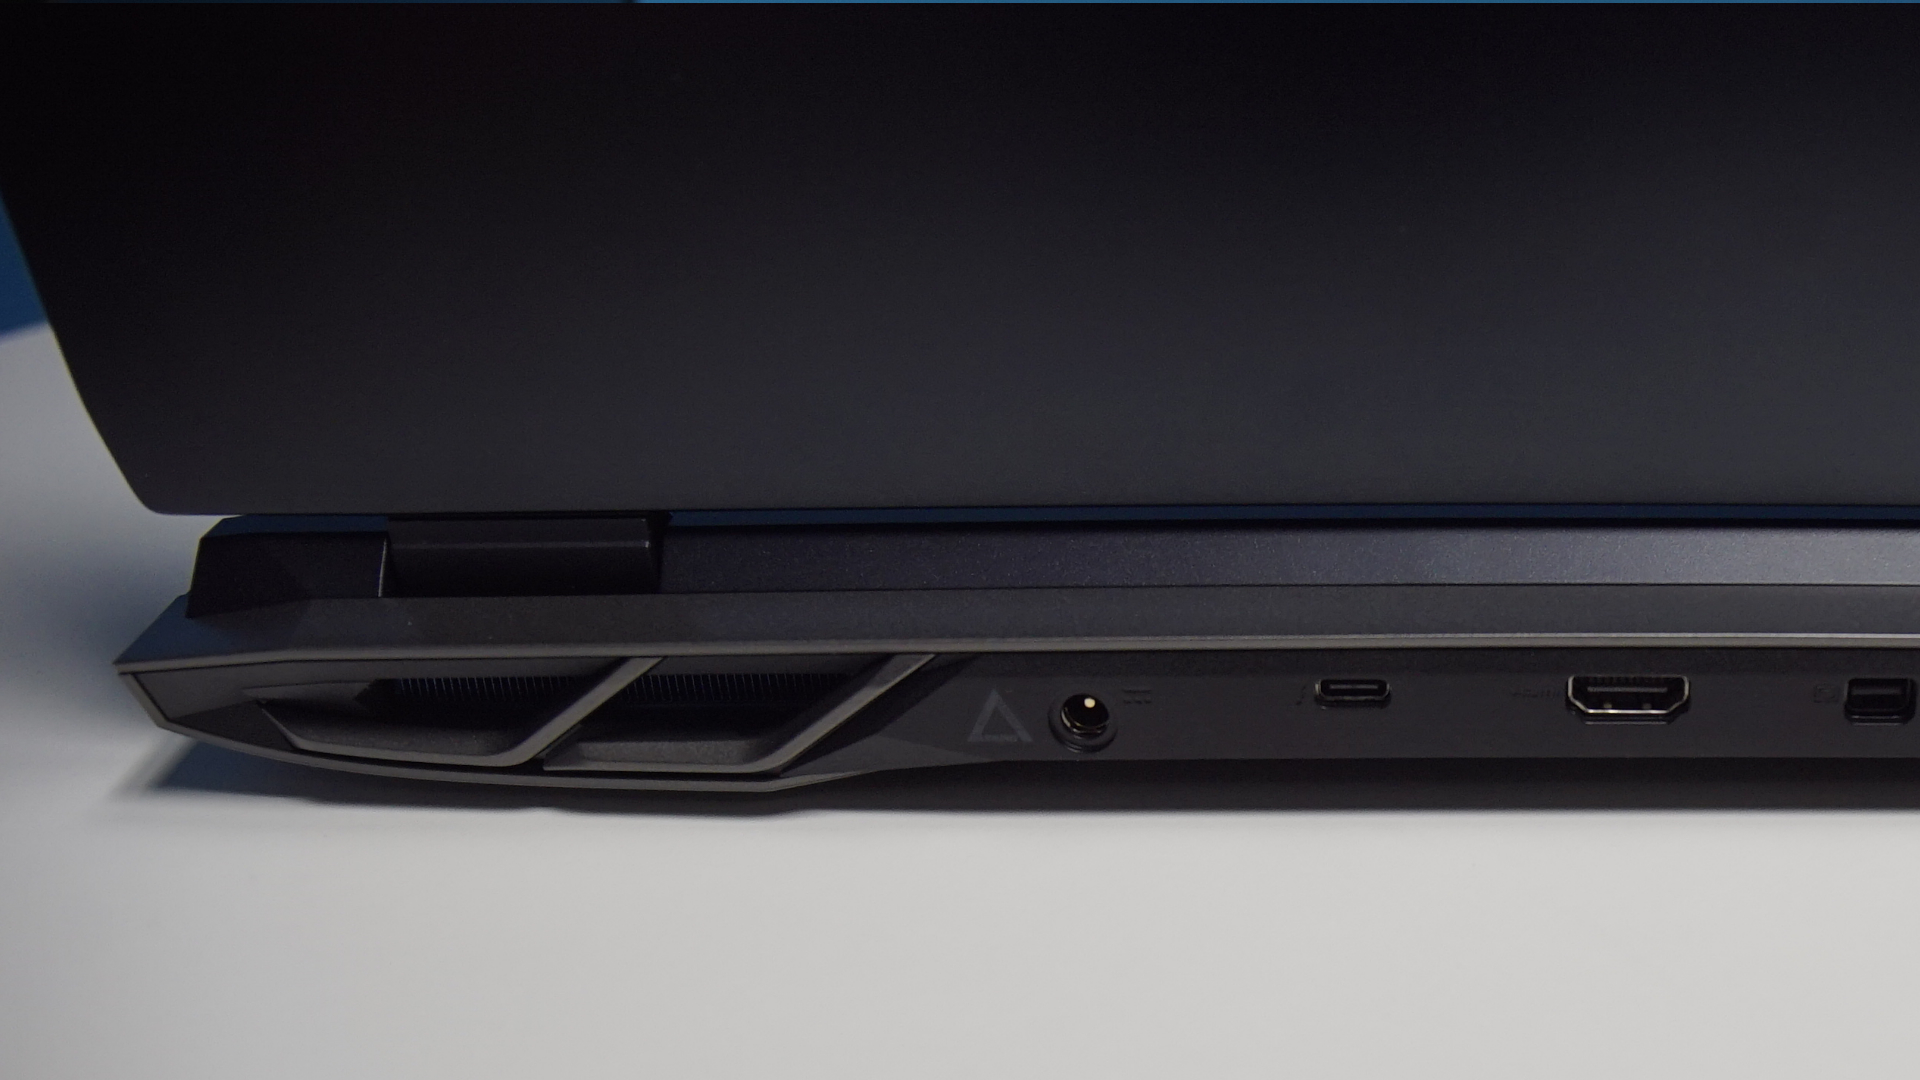 Acer Predator Helios gaming laptop back ports view.